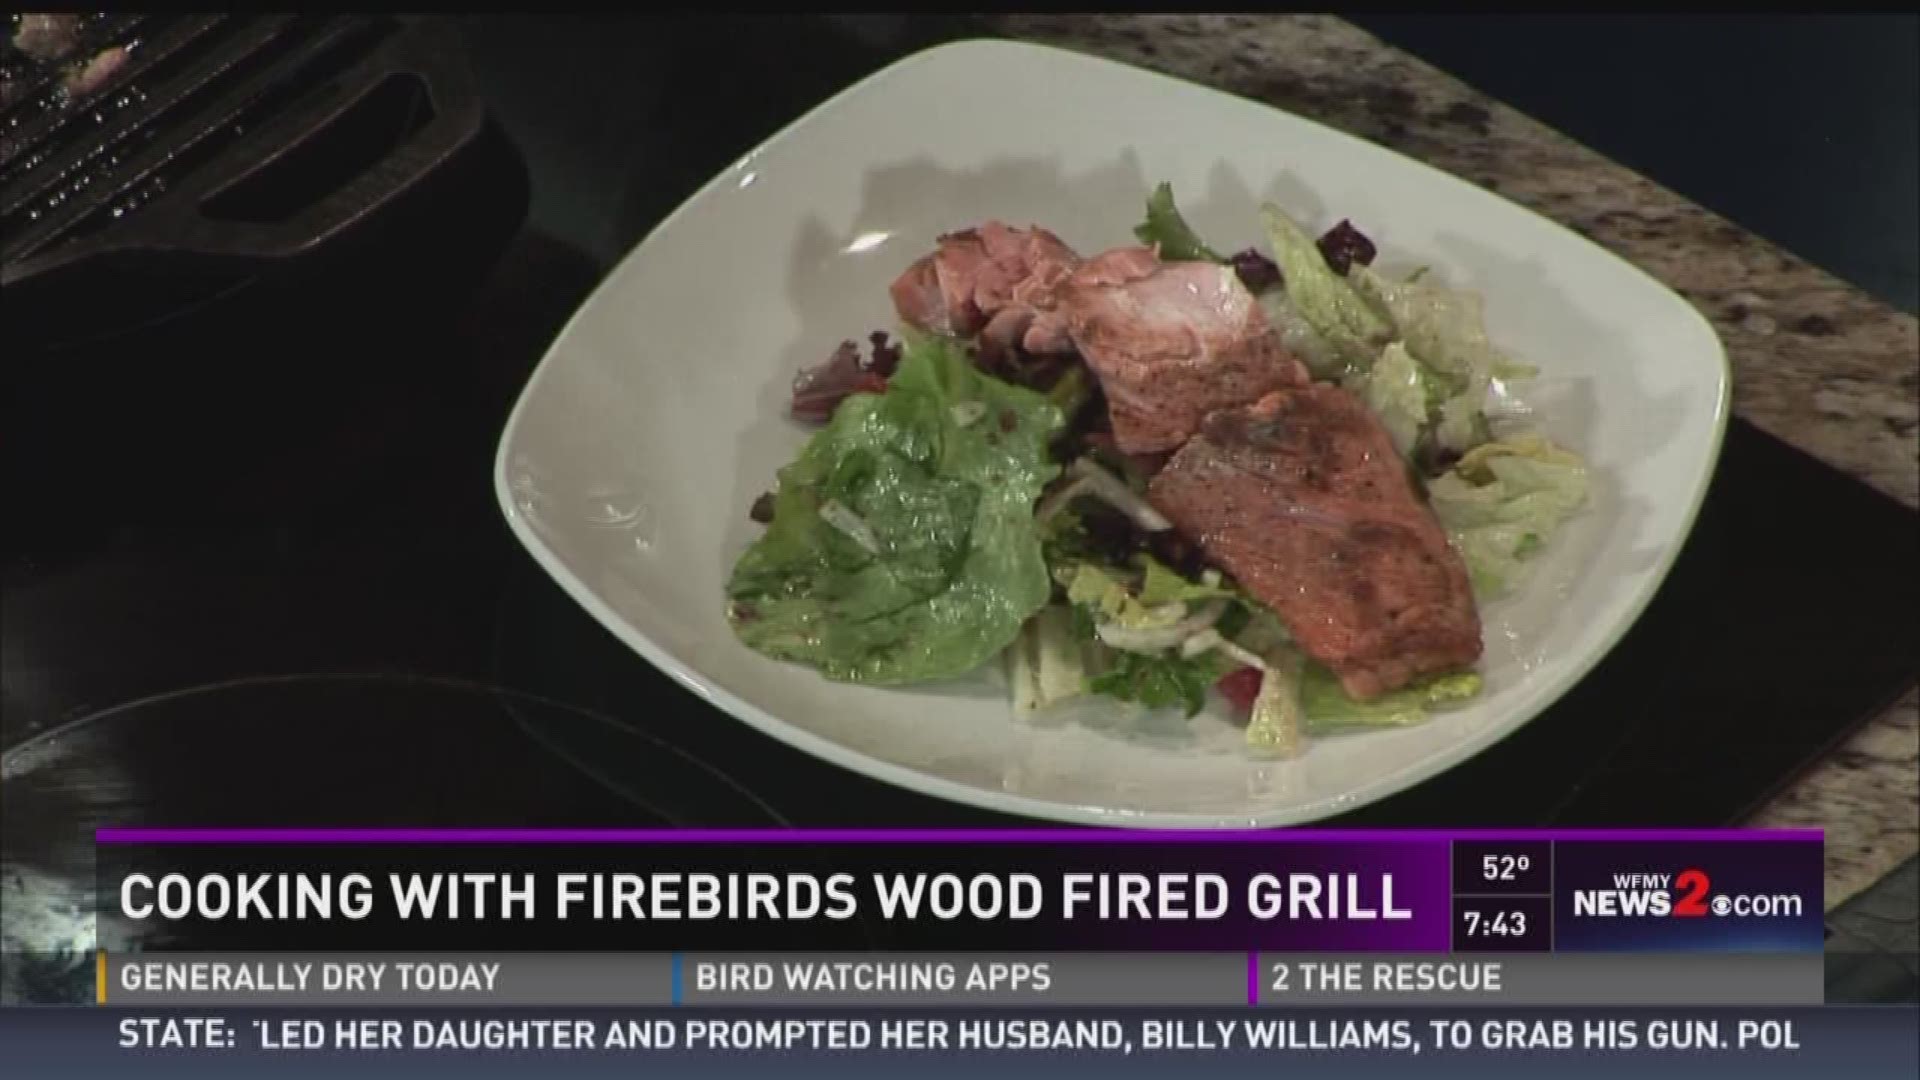 In The WFMY News 2 Kitchen With Firebirds Wood Fired Grill